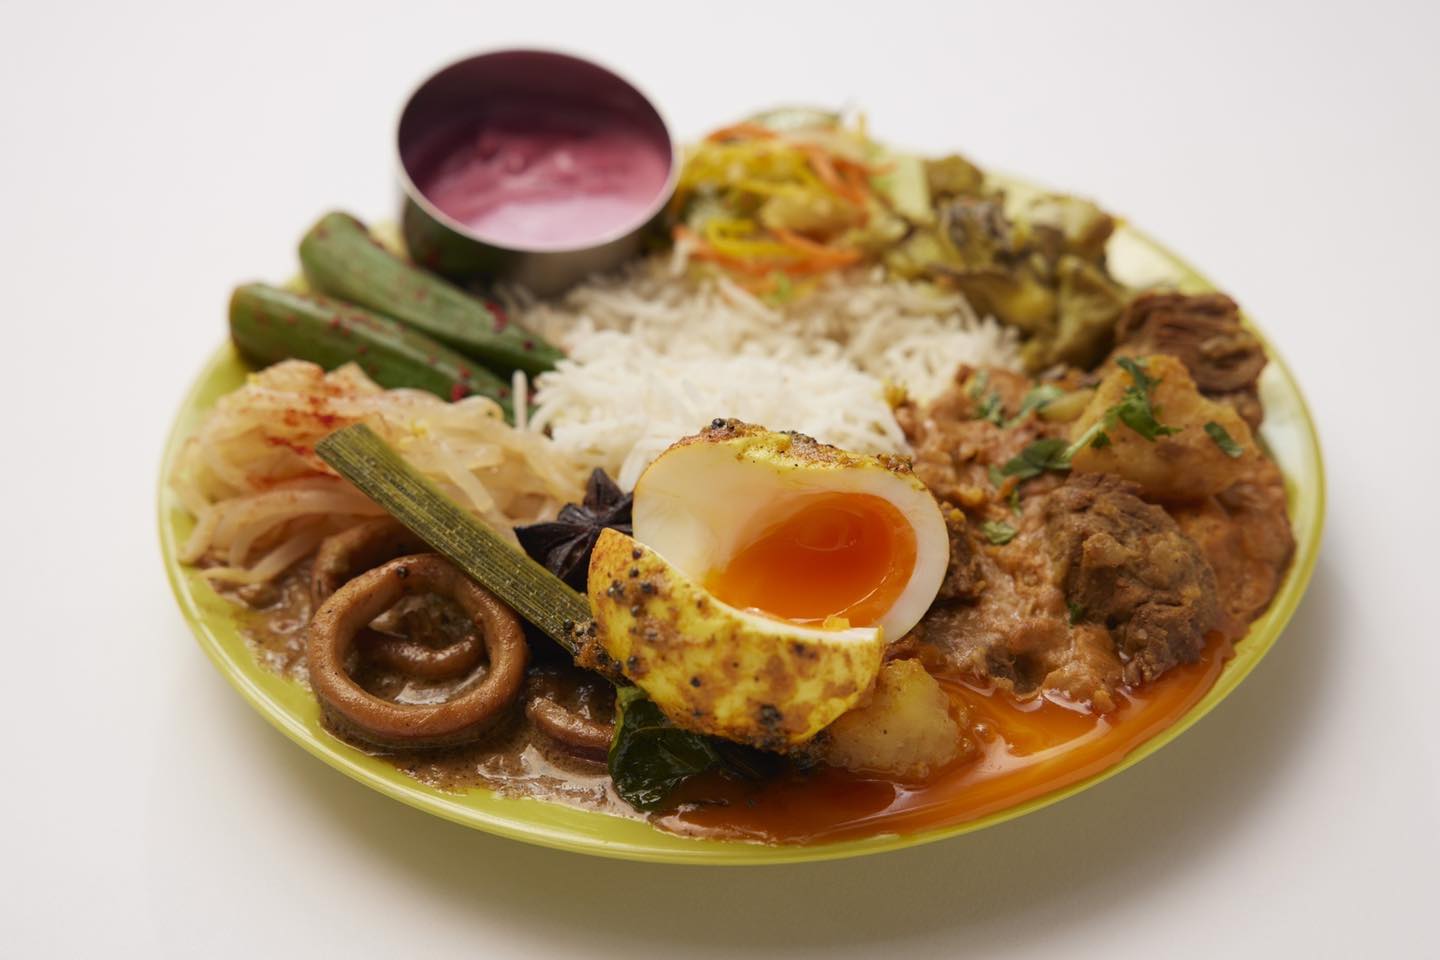 Zero Two Nasi Kandar Tokyo is the brainchild of Mr Tateda, with recipes inspired by his trips to Penang and Kuala Lumpur. Source: ゼロツーナシカンダールトーキョー